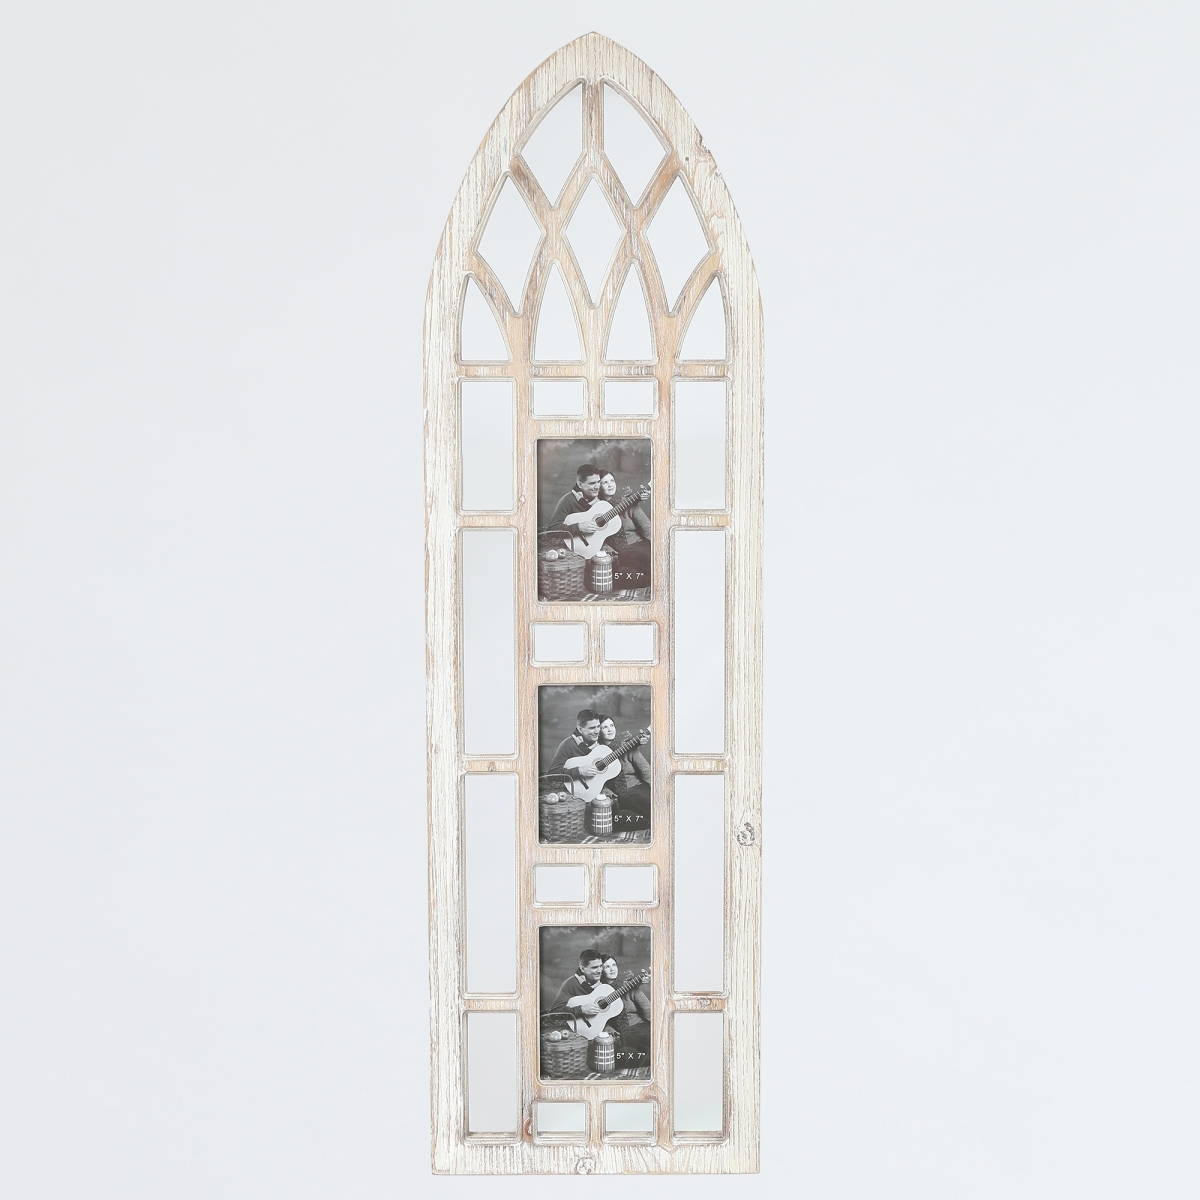 Whd522 5 X 7 In. Cathedral Wood Window With Three Wall Picture Frames, Brown